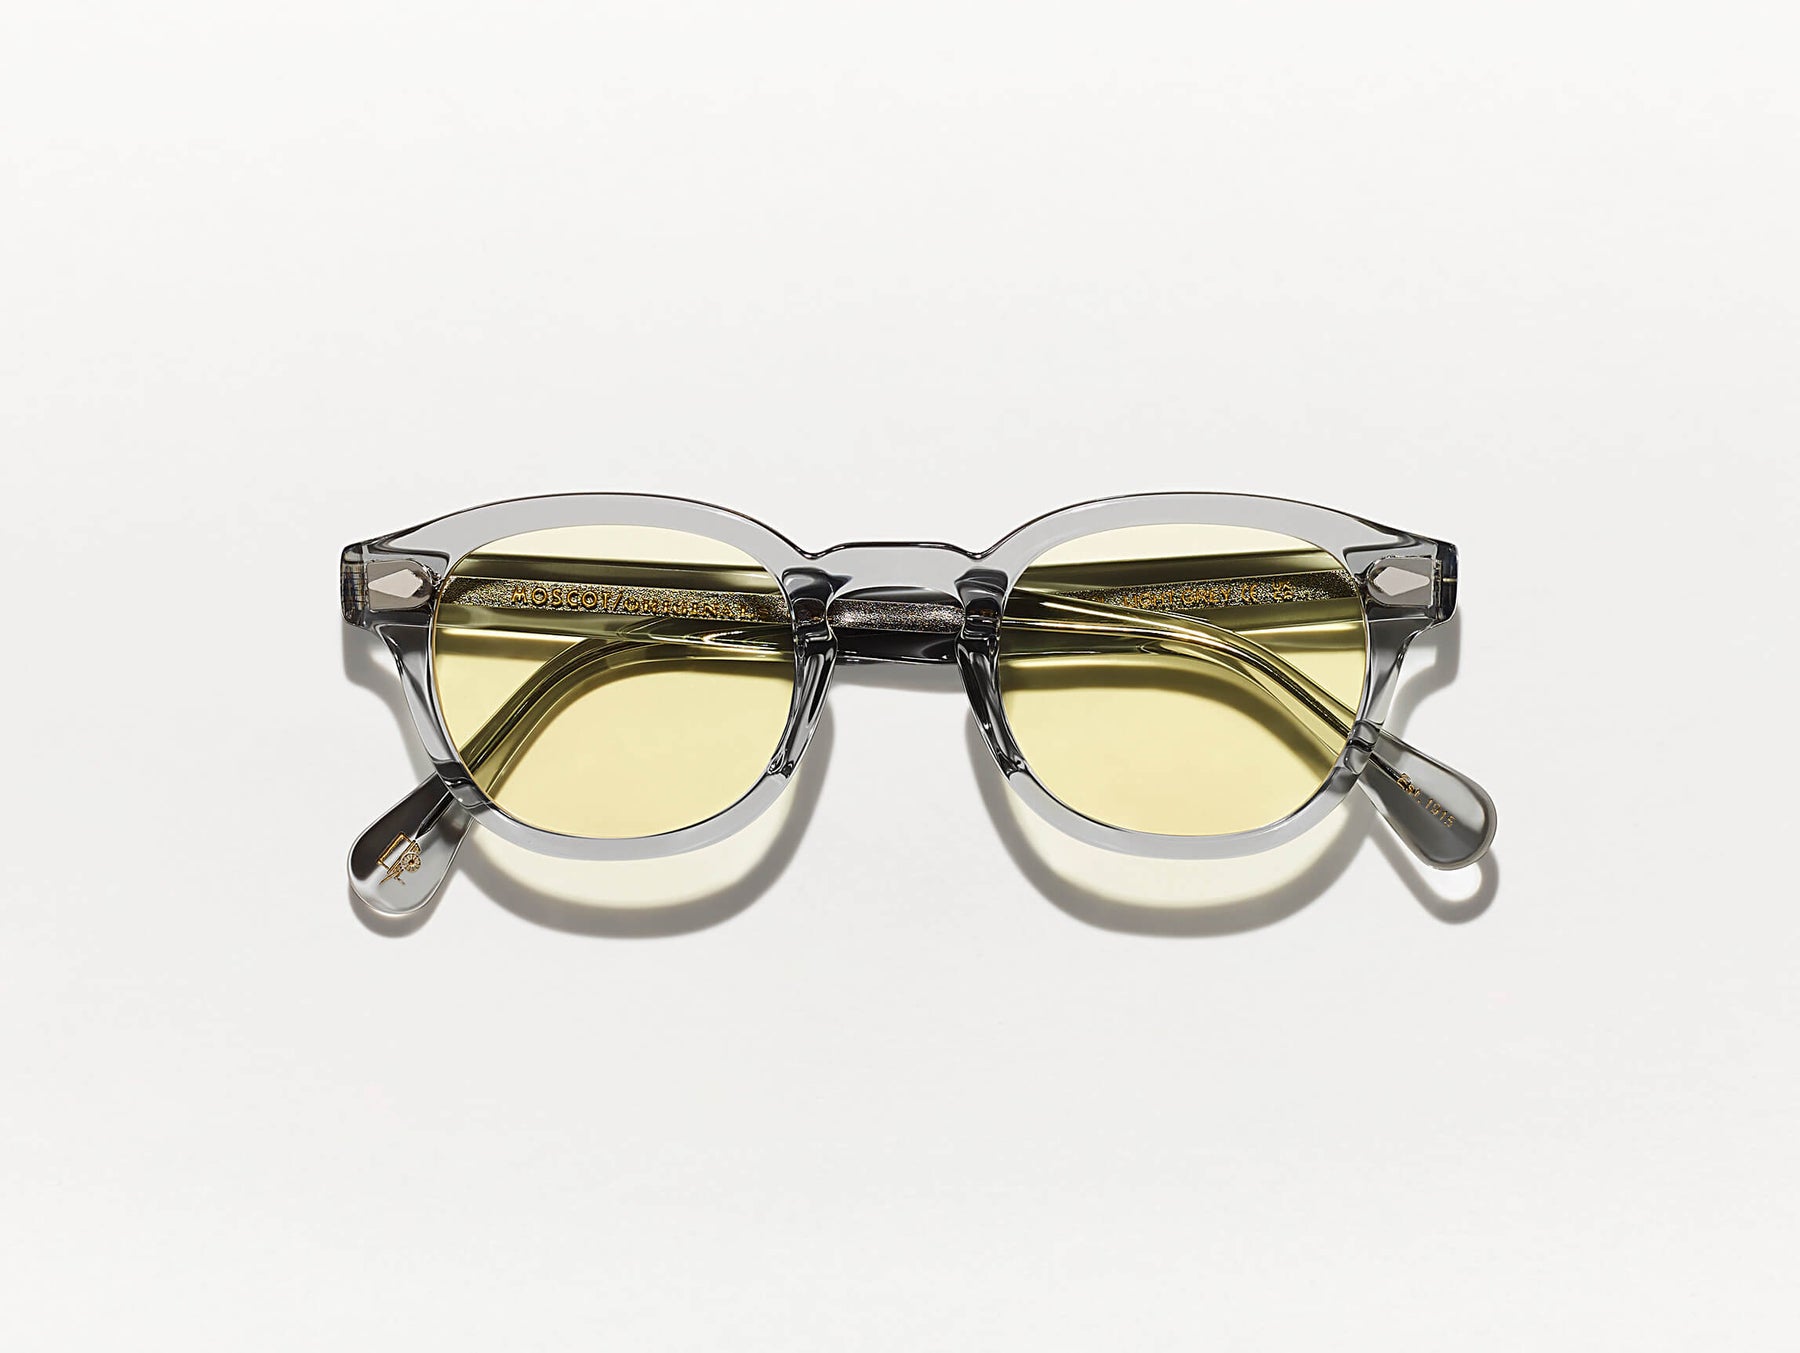 The LEMTOSH Pastel with Pastel Yellow Tinted Lenses